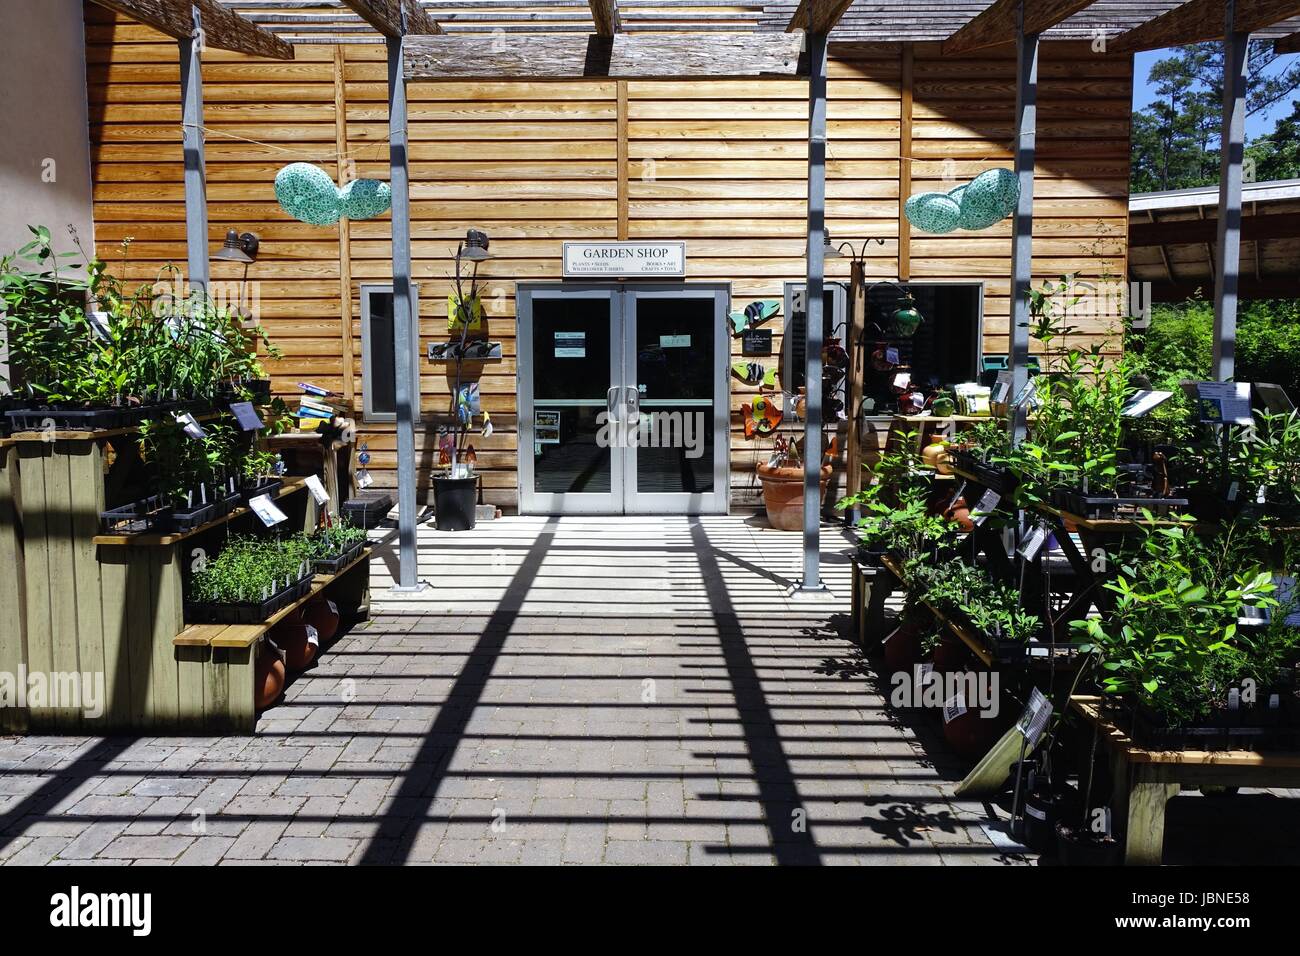 Entrance To The Garden Shop And Plant Display North Carolina Stock